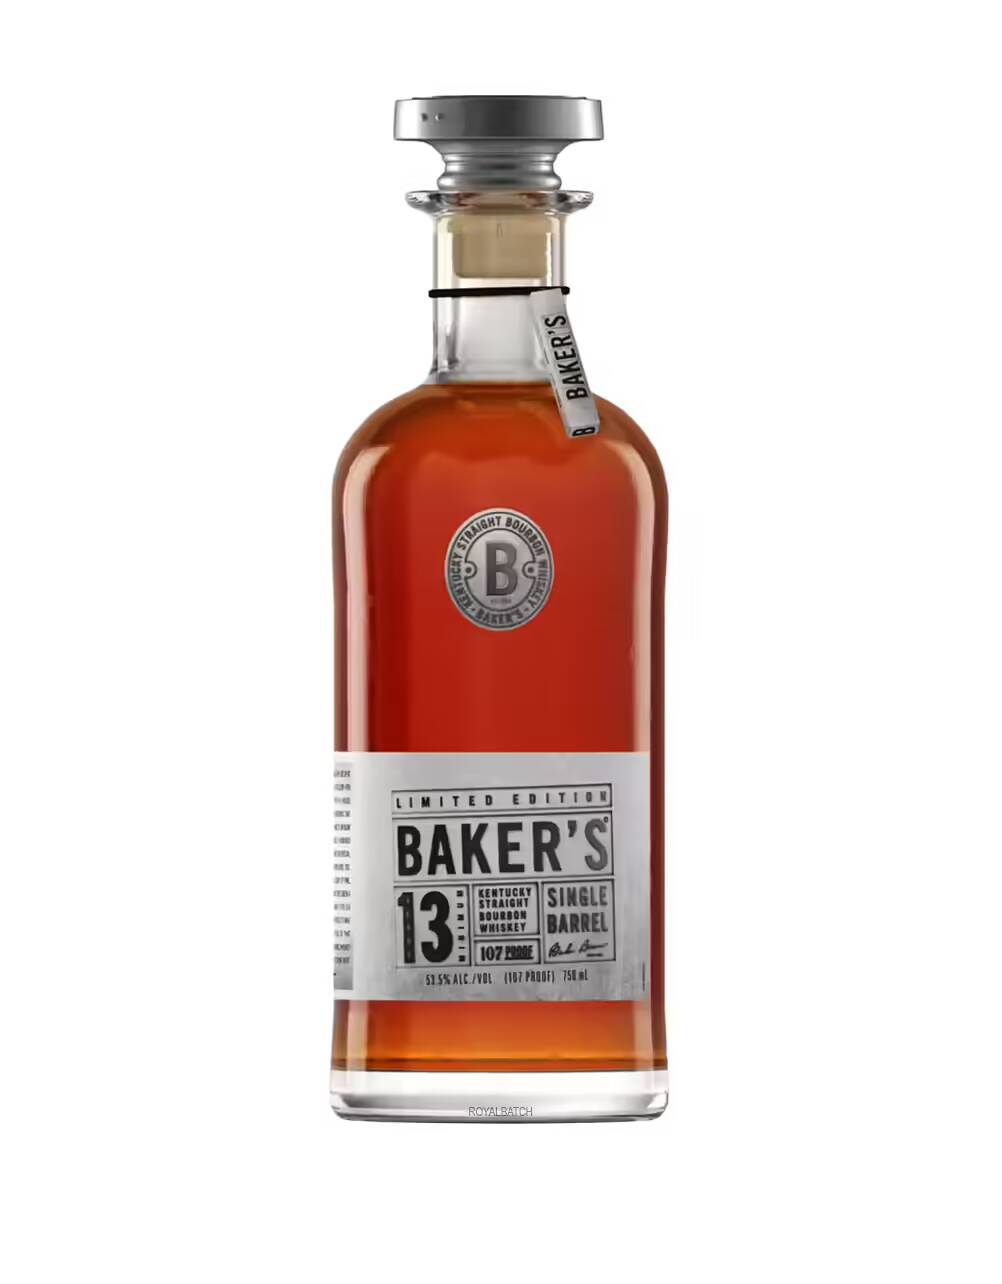 Bakers Limited Edition Single Barrel 13 Year Old Bourbon Whiskey